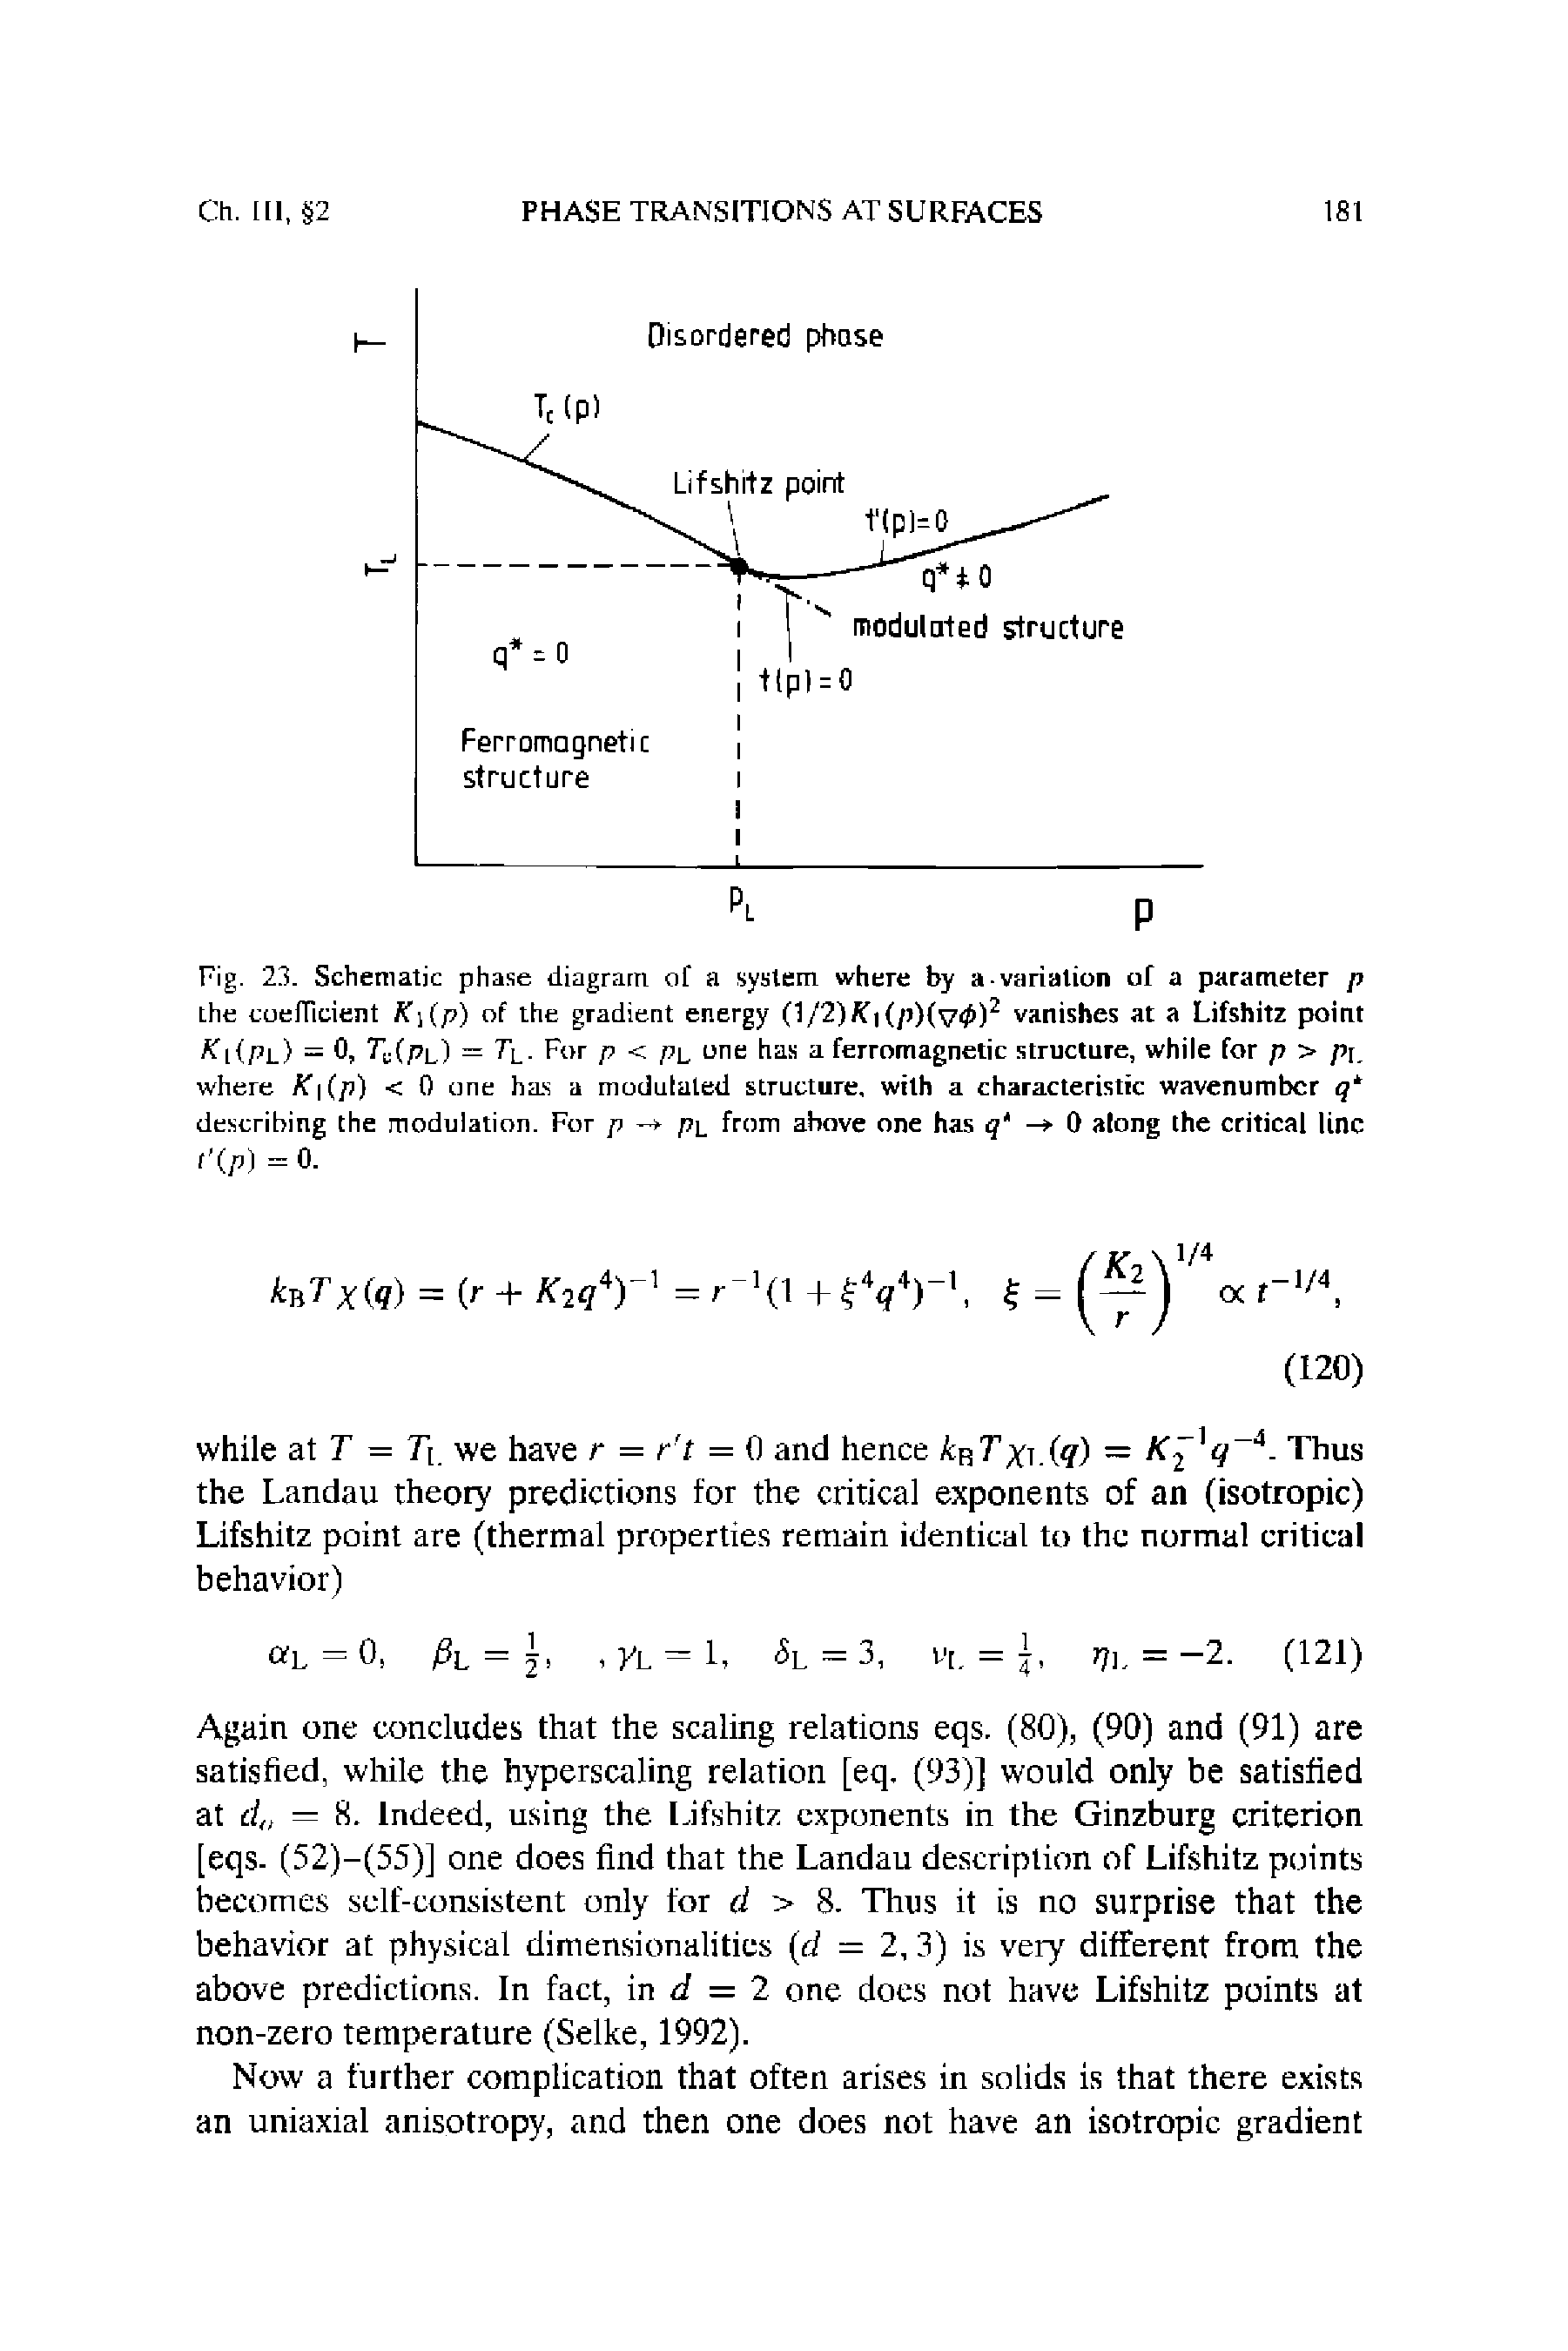 Fig. 23. Schematic phase diagram of a system where by a variation of a parameter p the coefficient K (p) of the gradient energy (1/2)Jf (p)(v0)2 vanishes at a Lifshitz point Kl<PL> = 0, r, (pL) = Tl. For p < pl one has a ferromagnetic structure, while for p > pi where fC (p) < 0 one has a modulated structure, with a characteristic wavenumber q describing the modulation. For p -> p from above one has — 0 along the critical line...